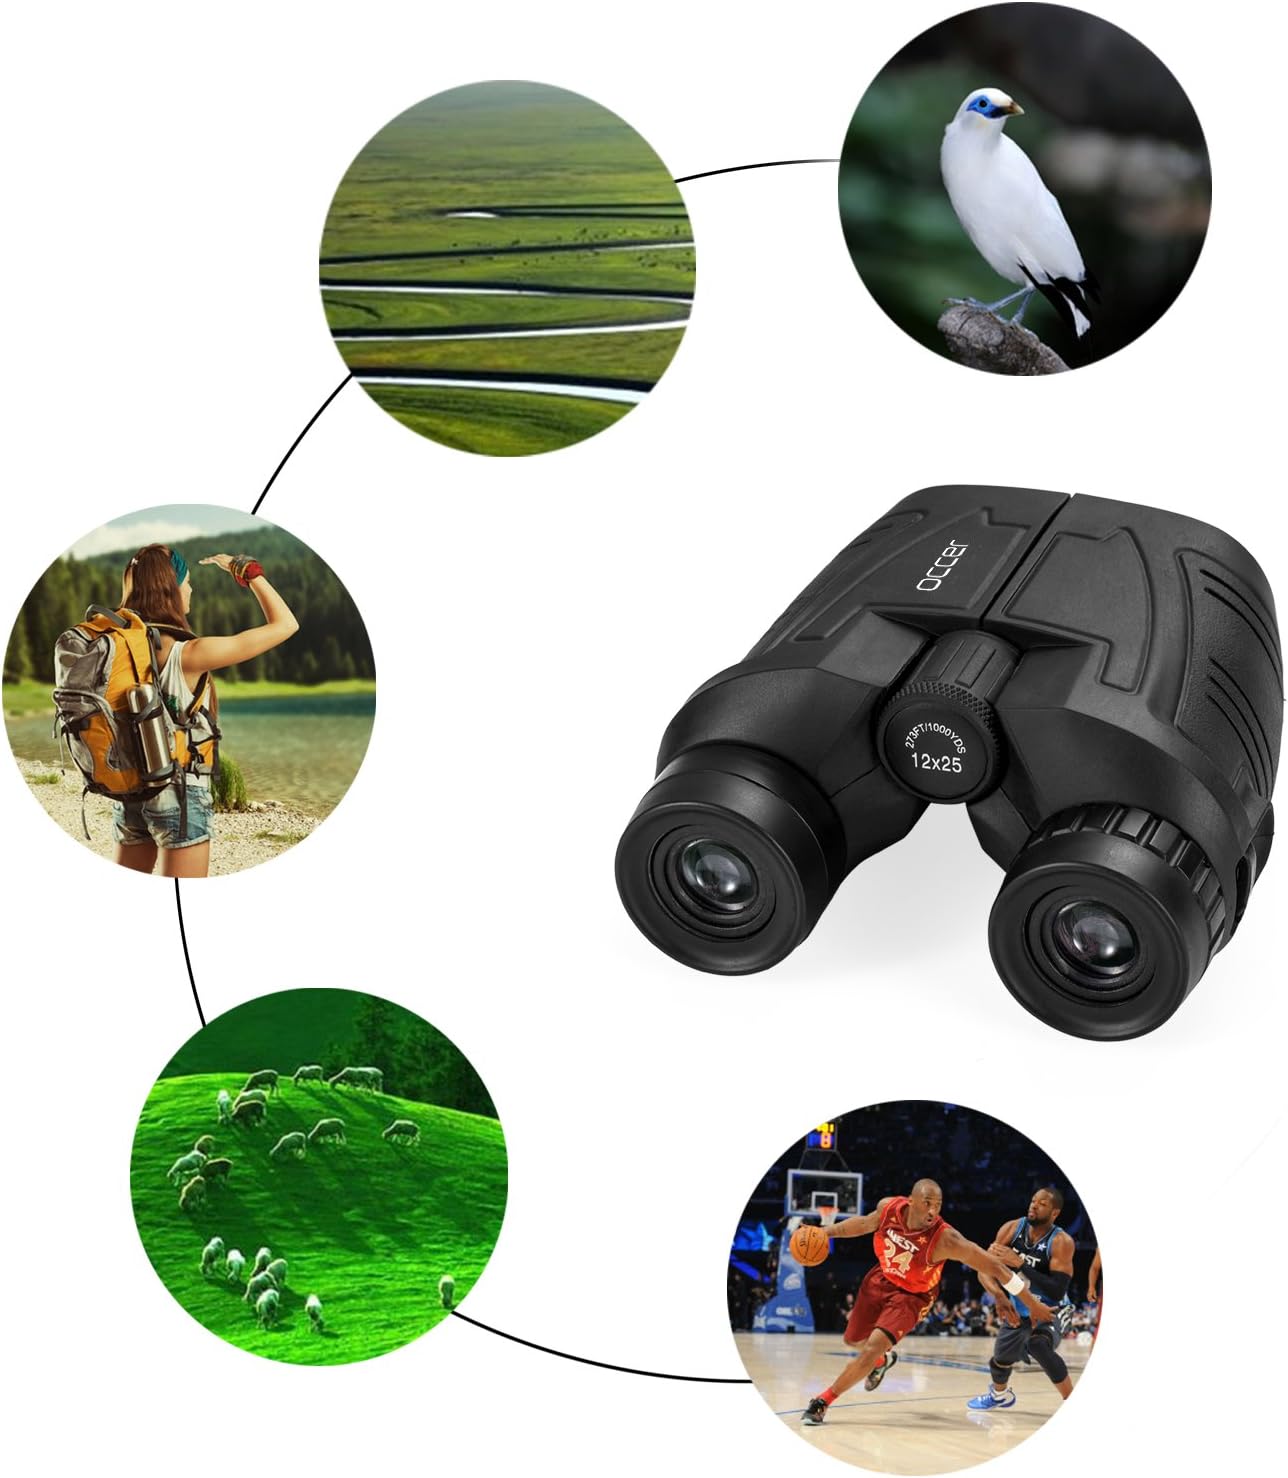 Occer 12x25 Compact Kids Binoculars with Low Light Night Vision,Folding Small Waterproof Large Eyepiece Binoculars for Adults,Great for Travel,Bird Watching,Hunting,Hiking,Outdoor Sports